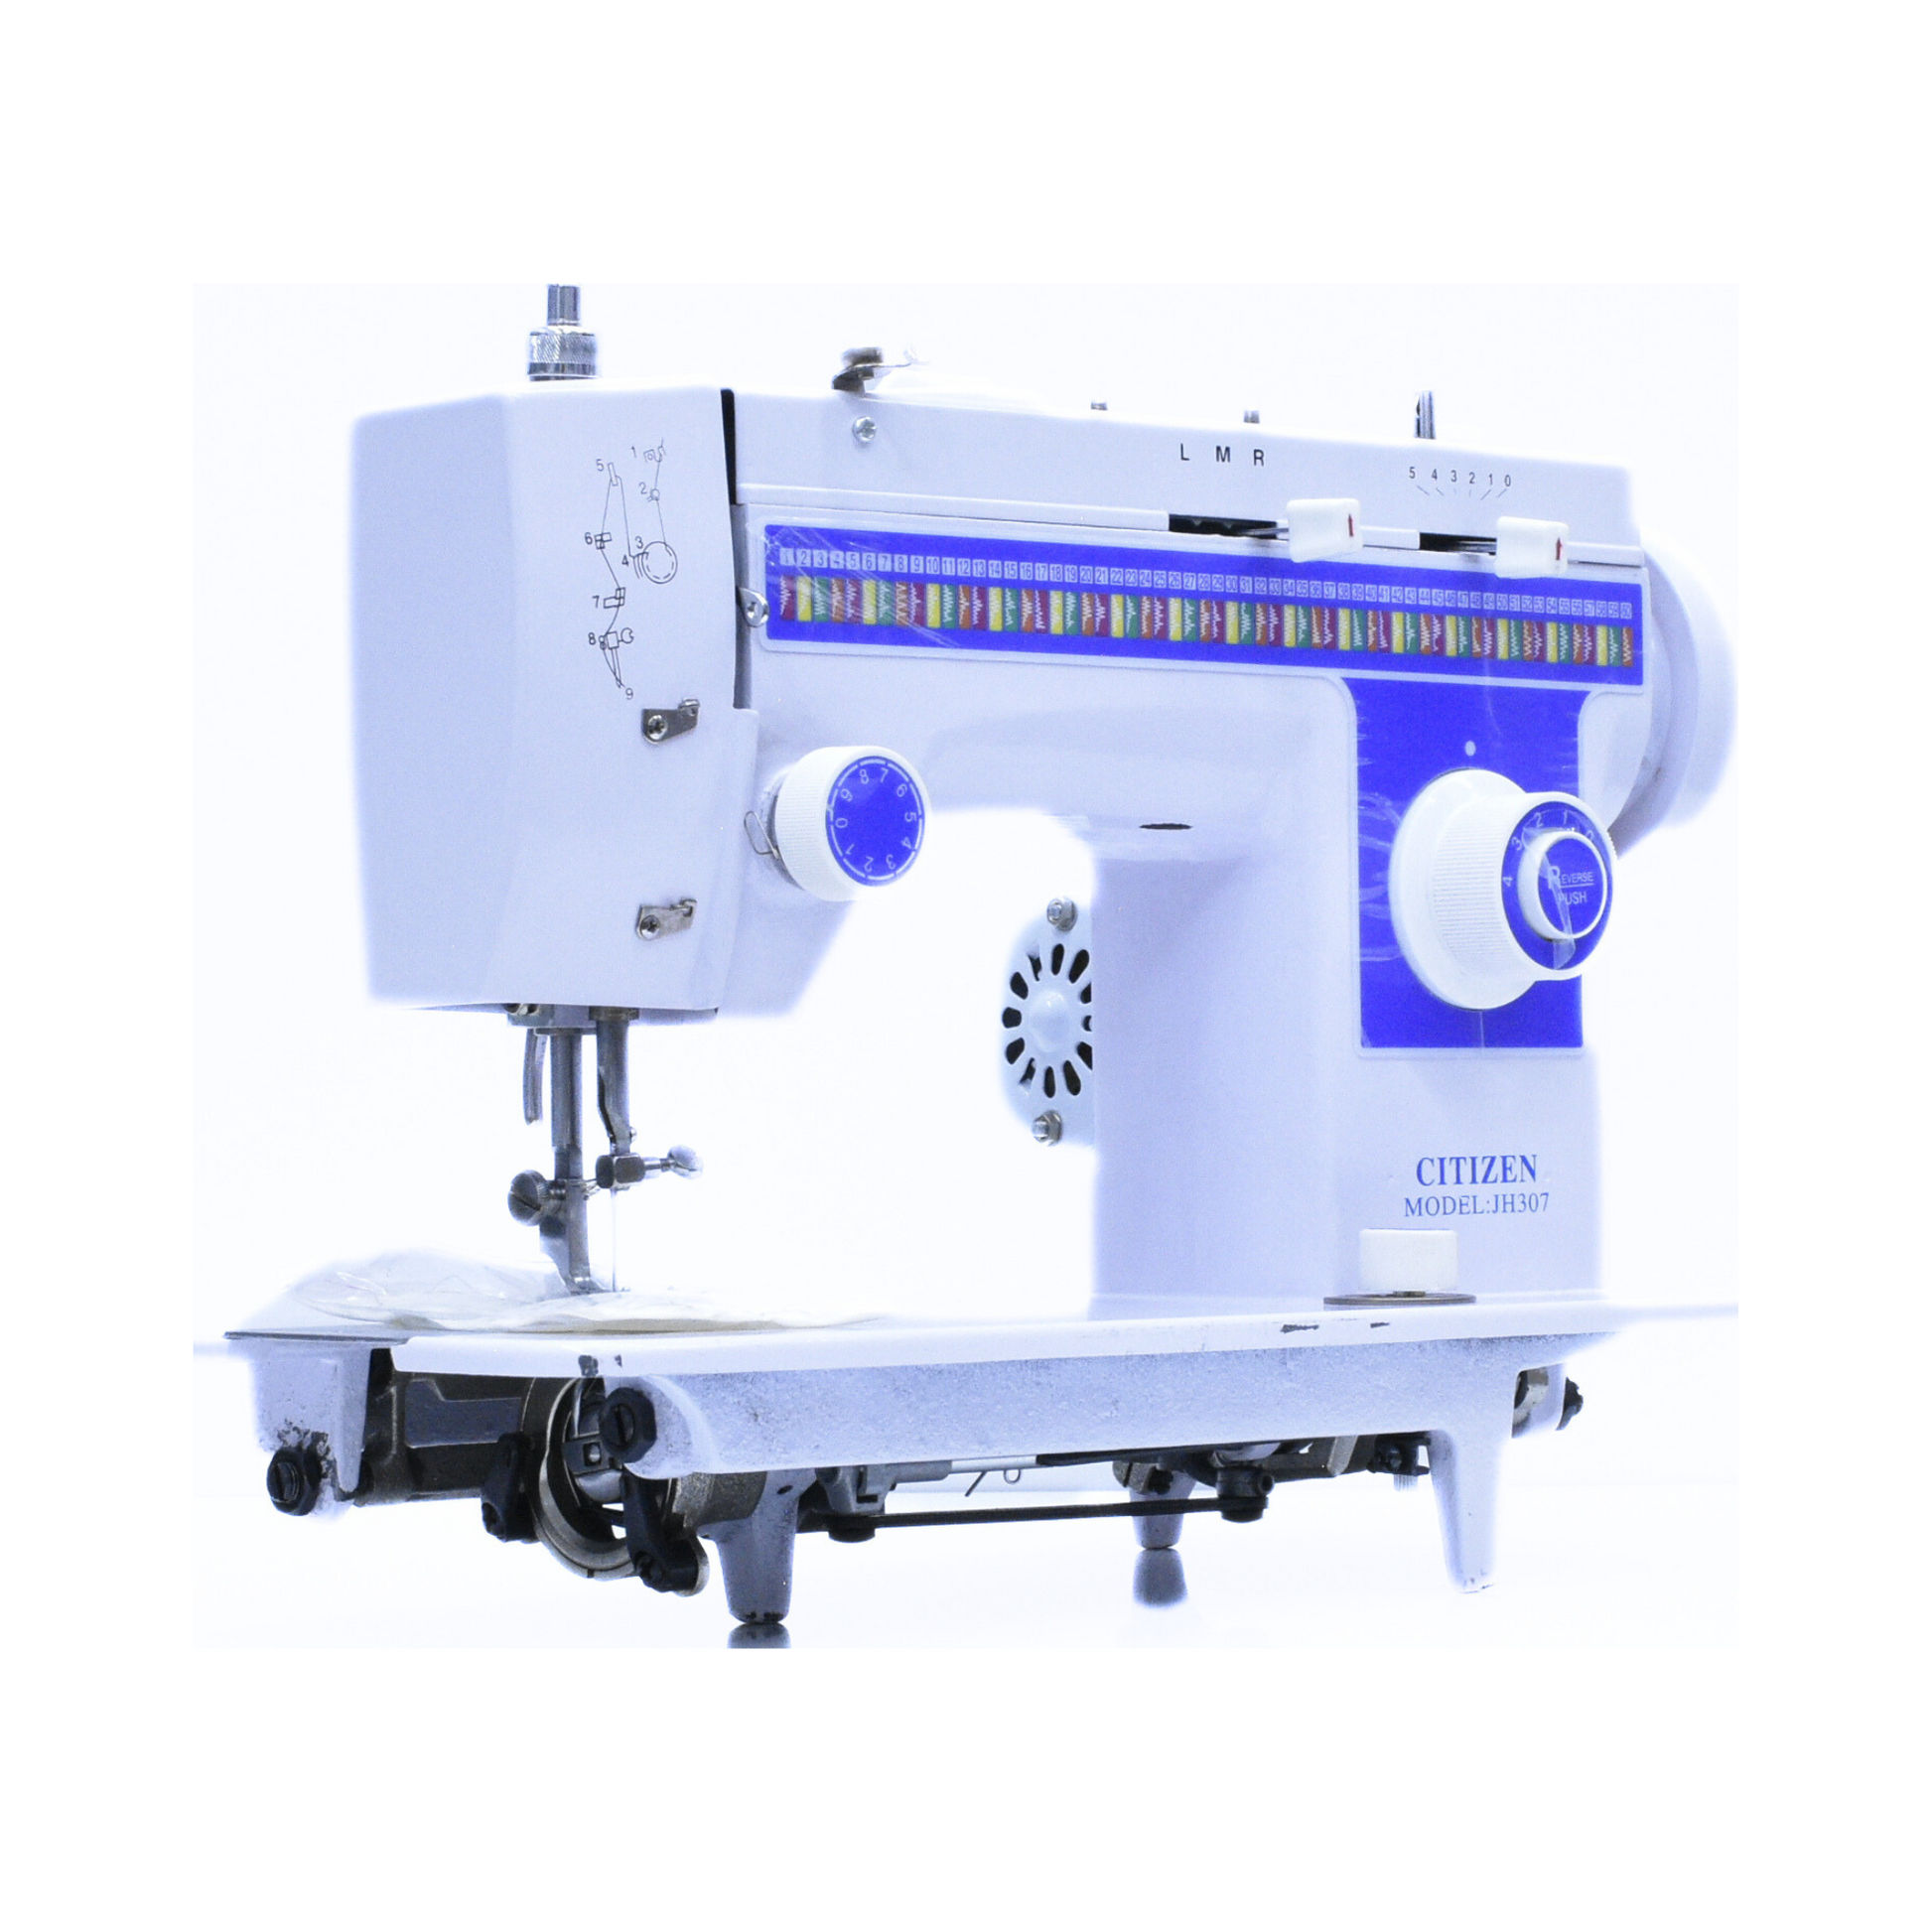 Citizen JH-307 - Sewing machine - White - Side view